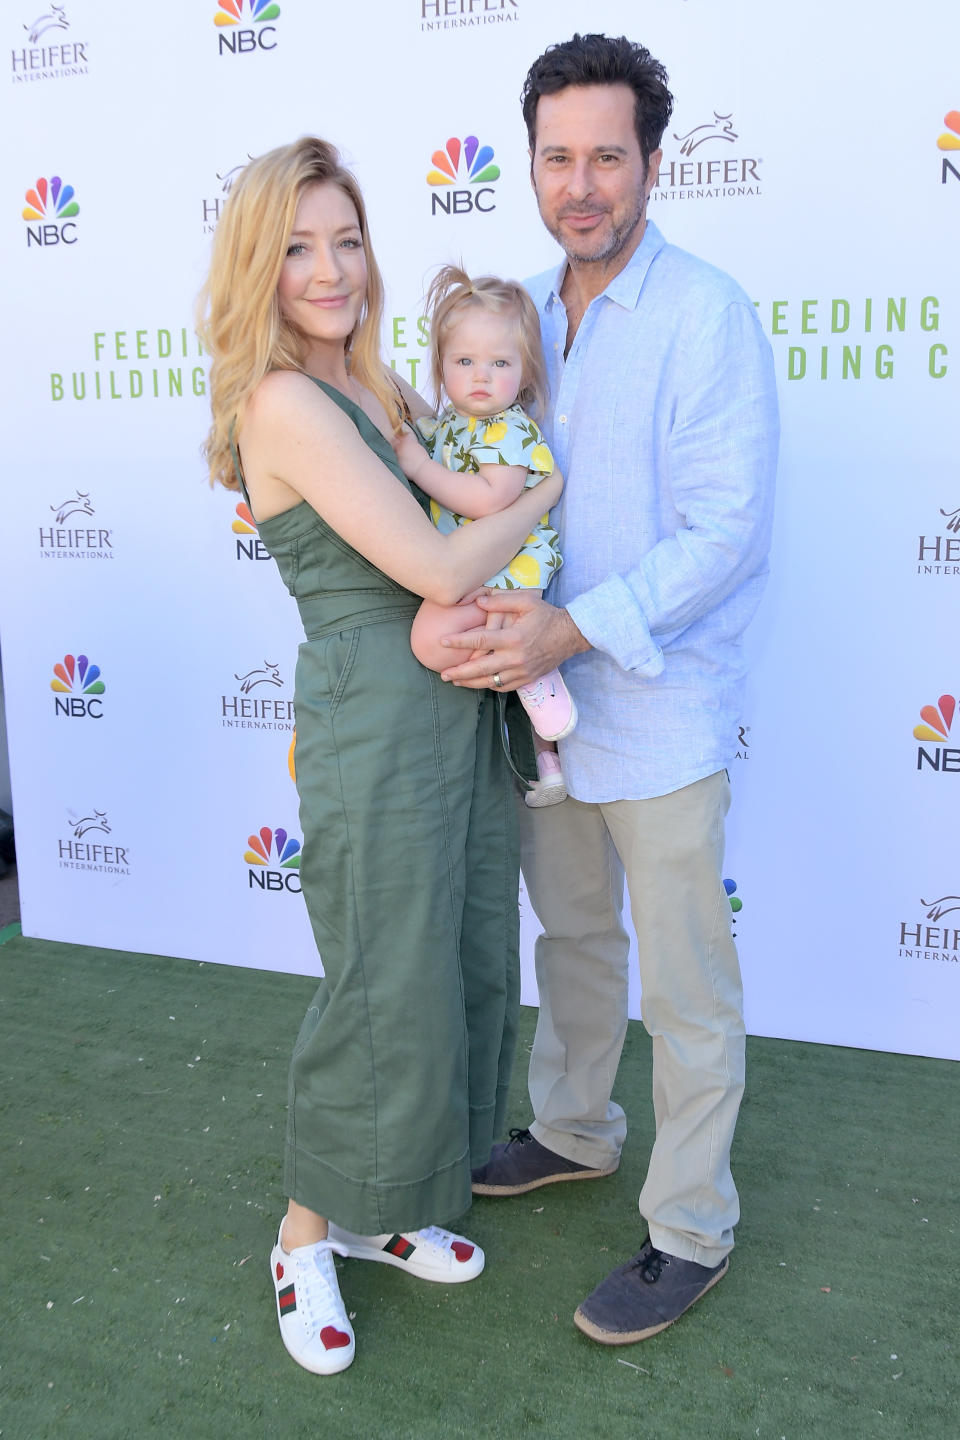 they're dressed casually with their baby at an NBC event